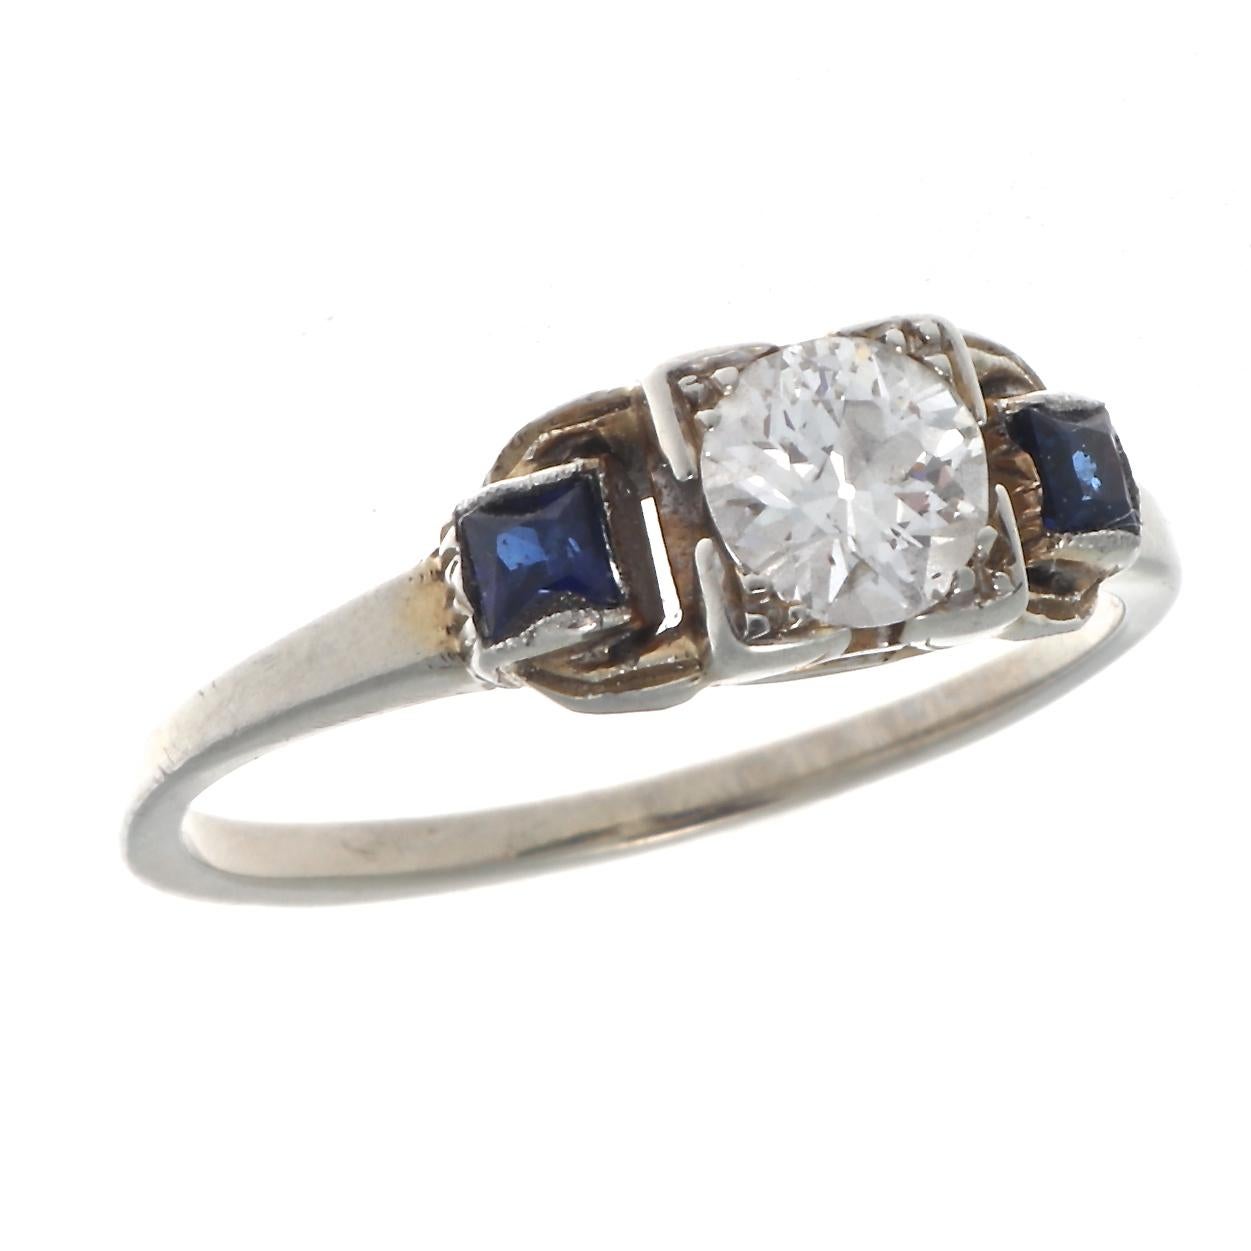 As timeless as an everlasting marriage, a uniquely understated approach to art deco design from the 1920's.  Featuring an old European cut diamond nestled between shoulders of royal blue natural sapphires. Crafted in 14k gold. Ring size 5-3/4 and